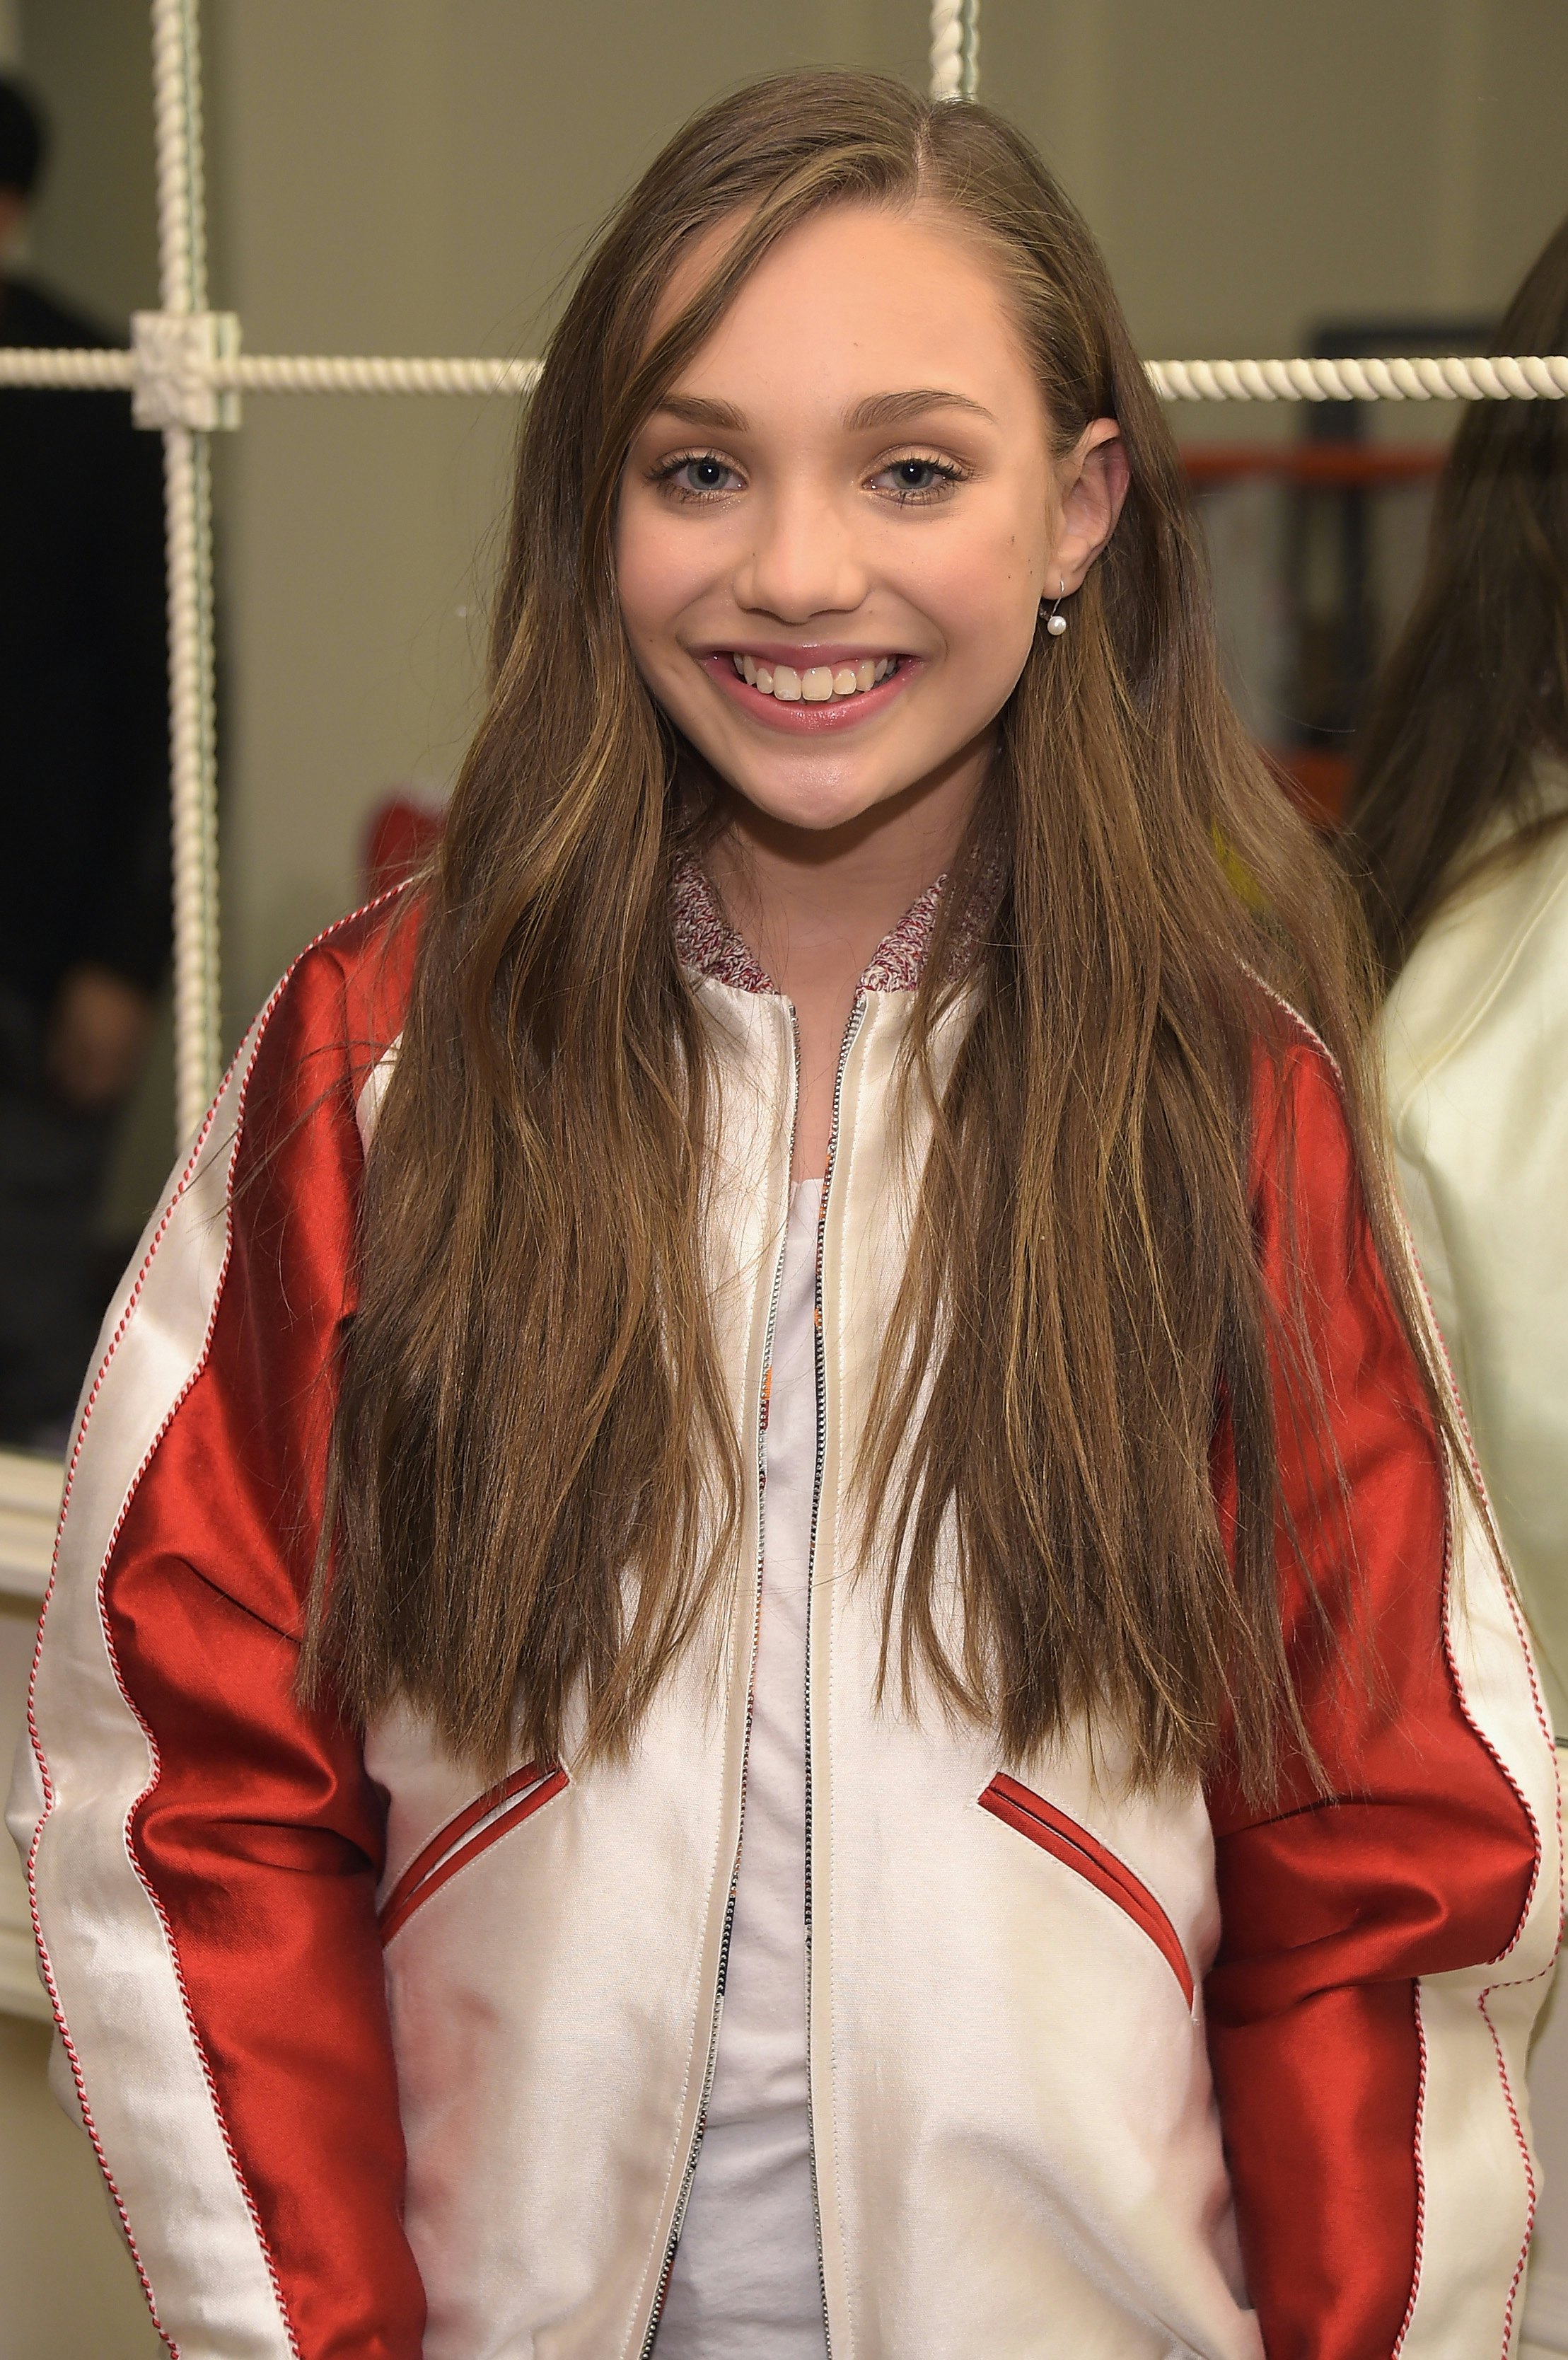 7 Maddie Ziegler Makeup Tips Because We Can All Learn Something From